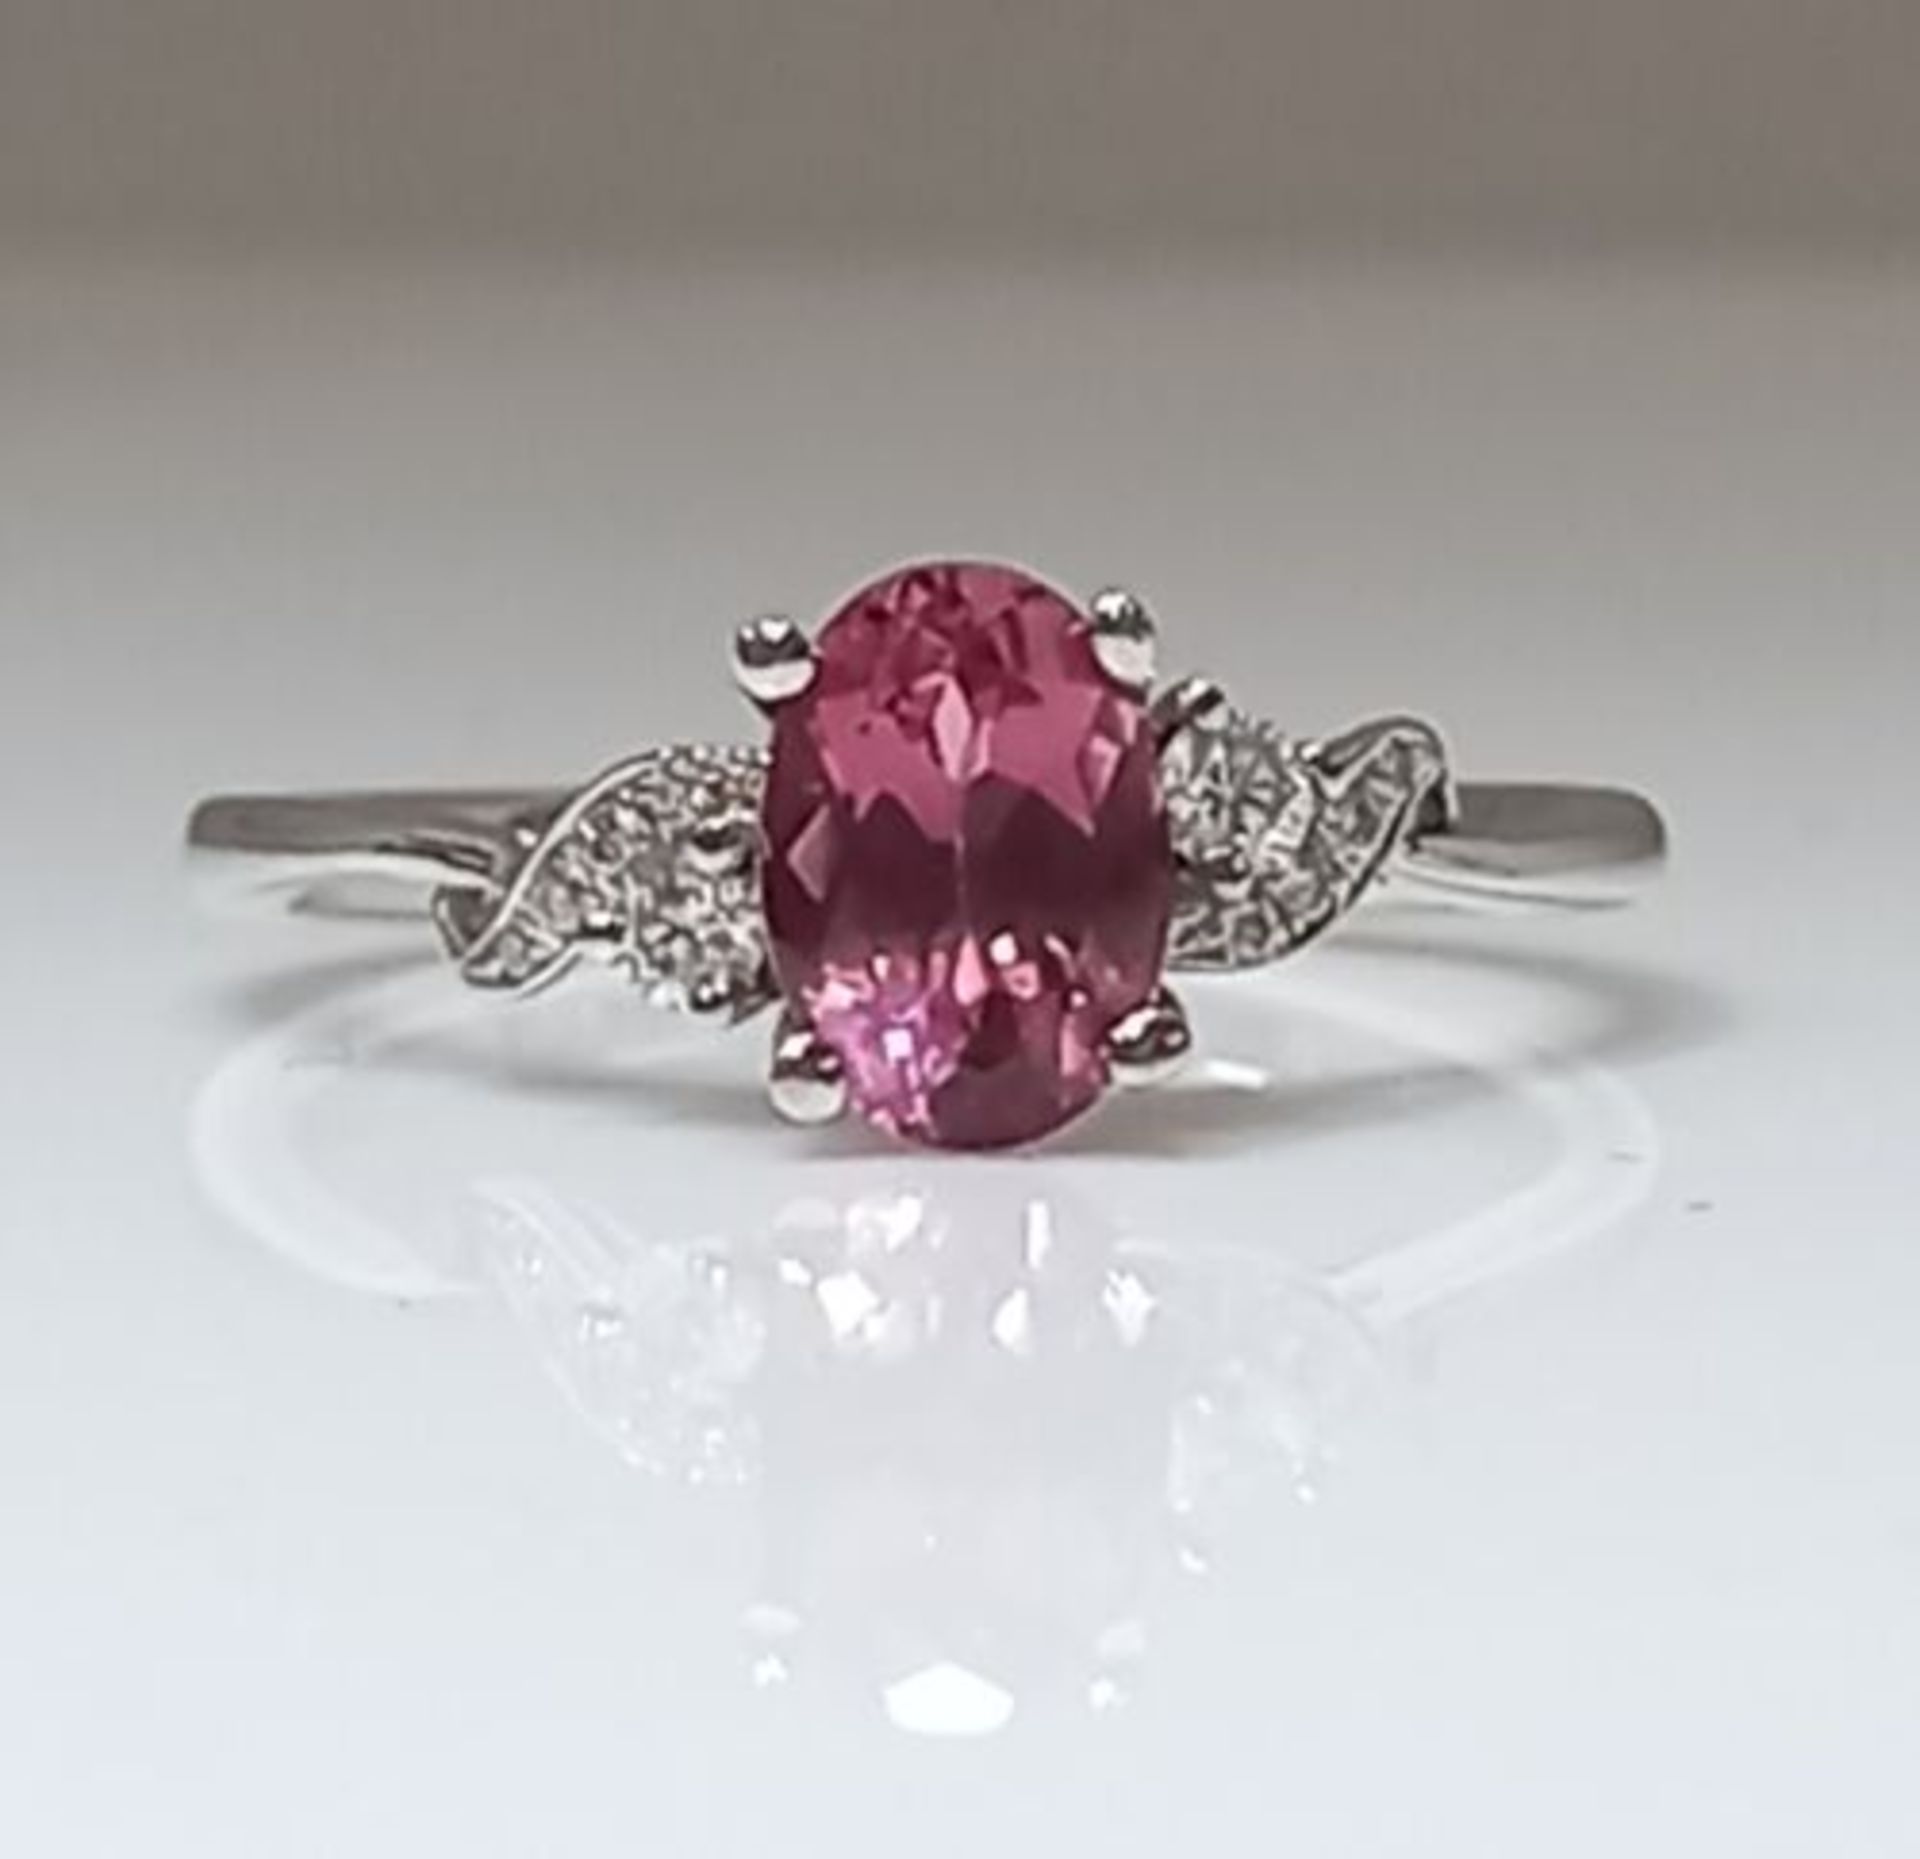 PINK SAPPHIRE 0.75CT & DIAMOND 0.10CT RING/WHITE GOLD + GIFT BOX + VALUATION CERTIFICATE OF £2800